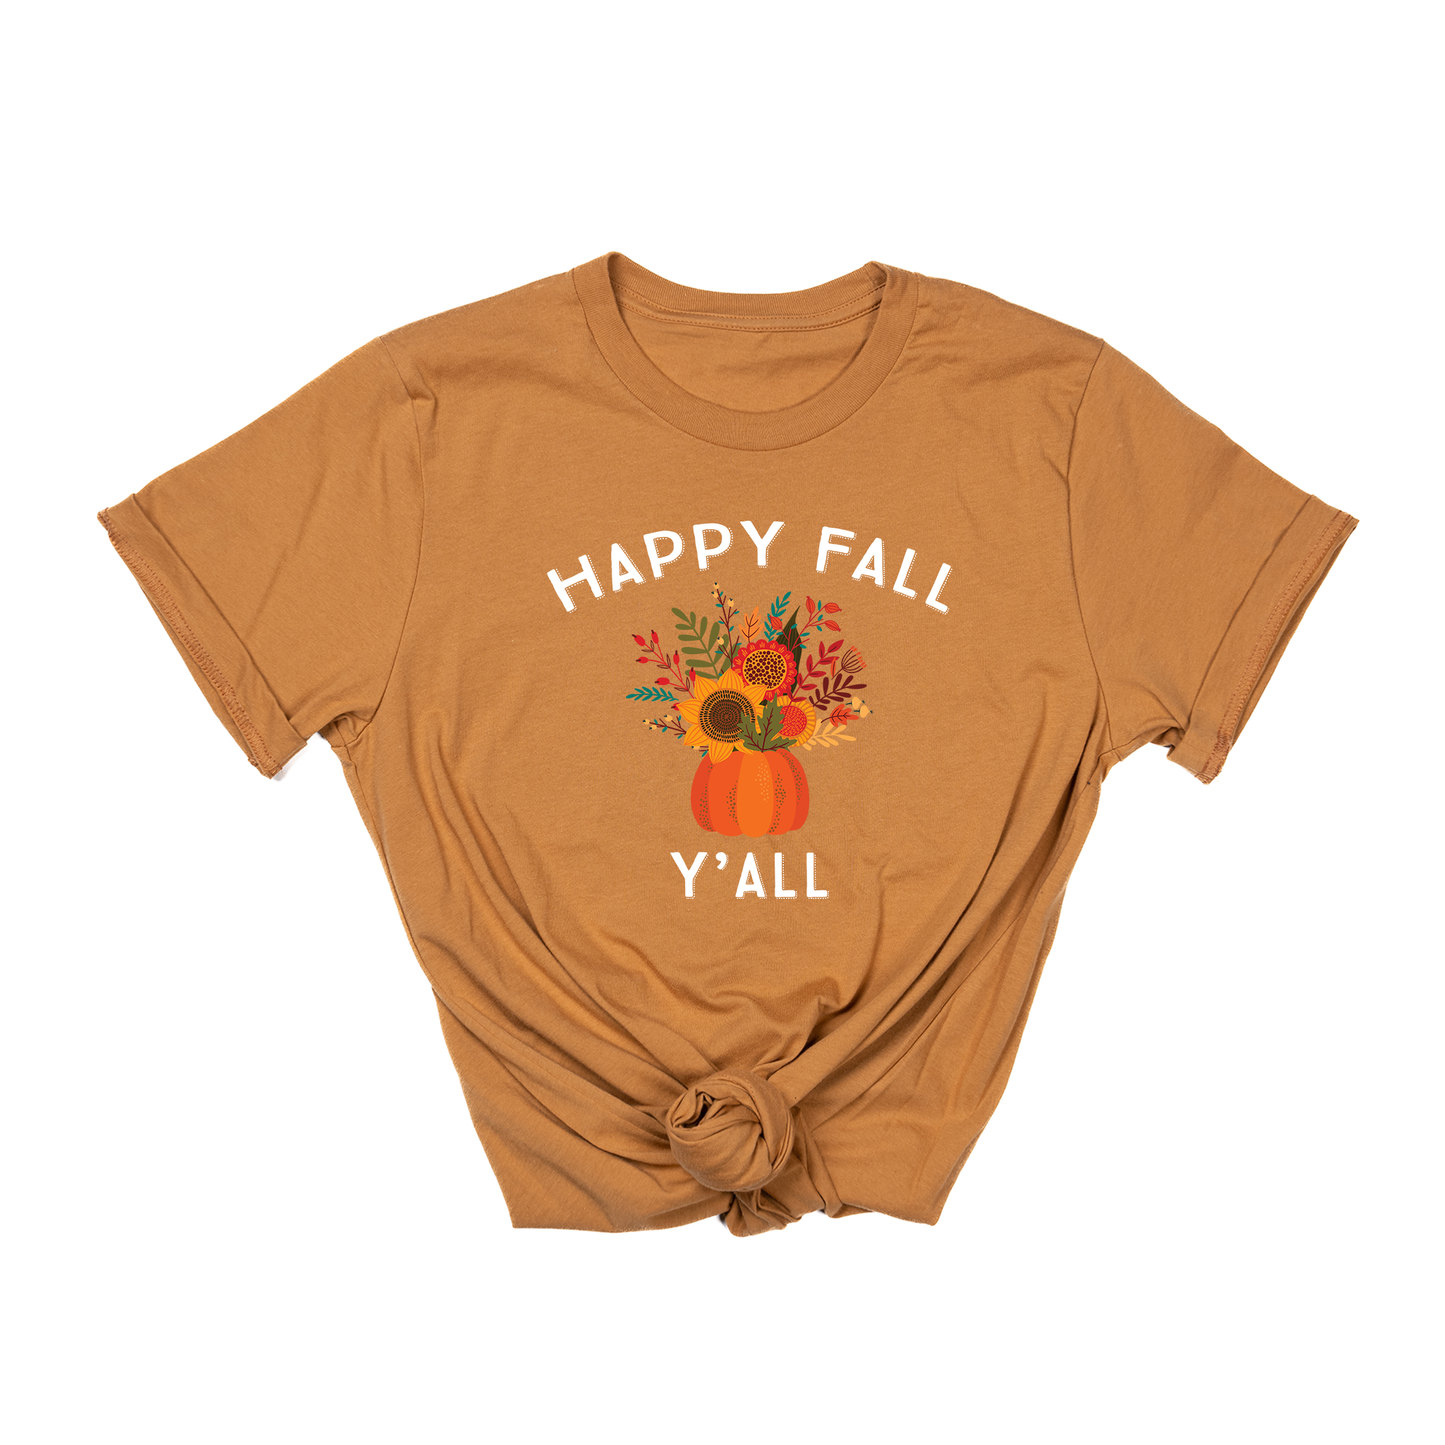 Happy Fall Y'all (White) - Tee (Camel)